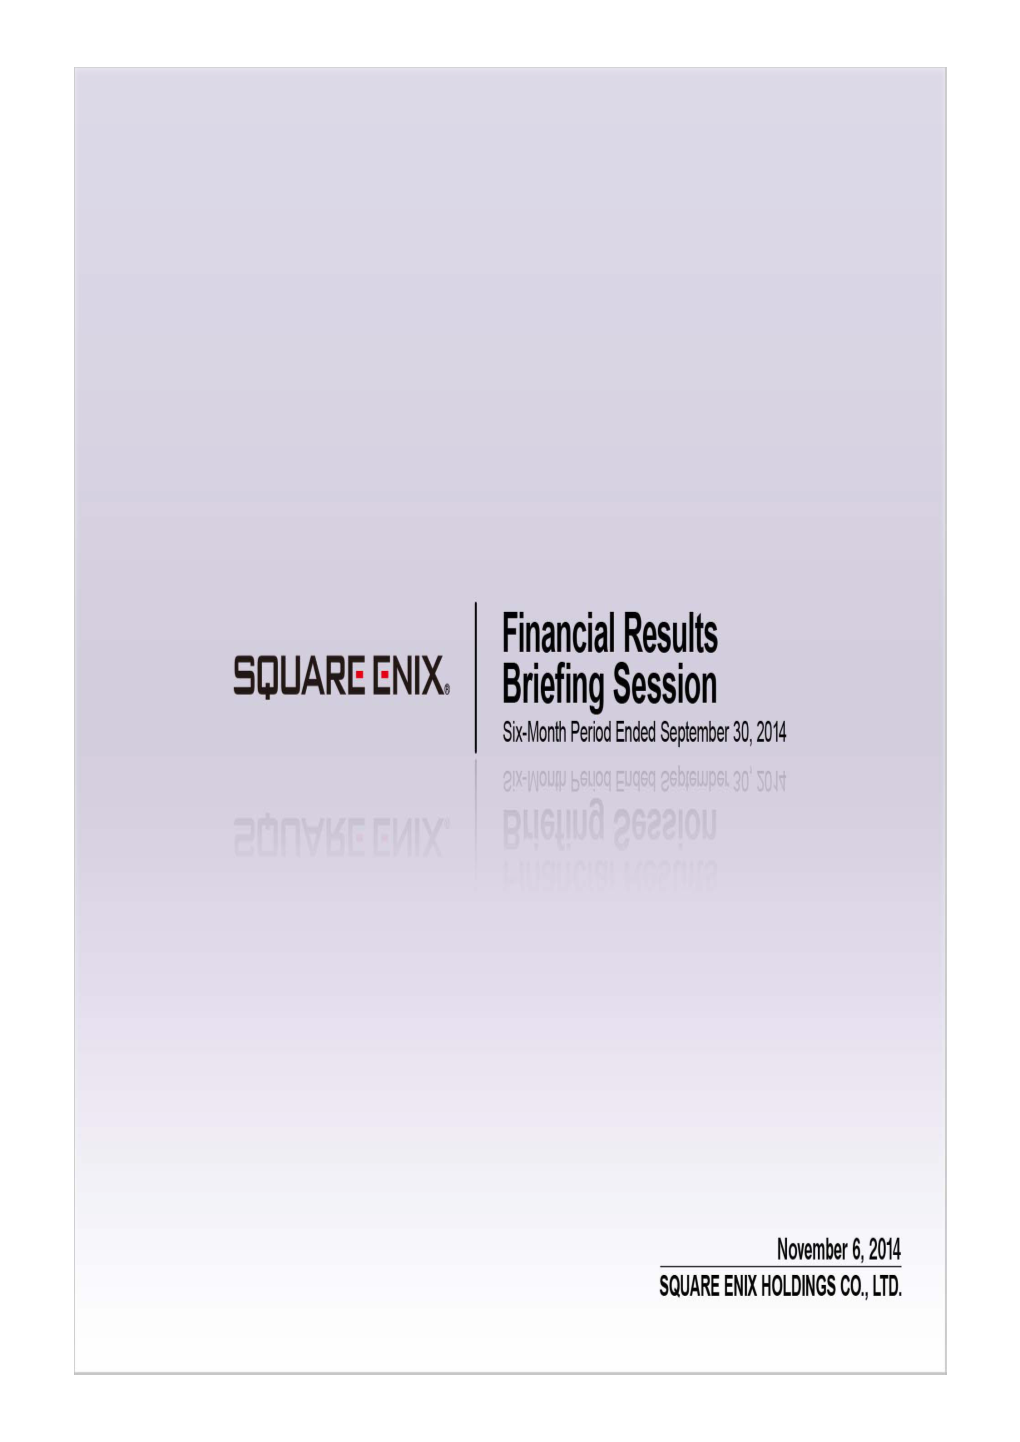 Results Briefing Session for the Six-Month Period